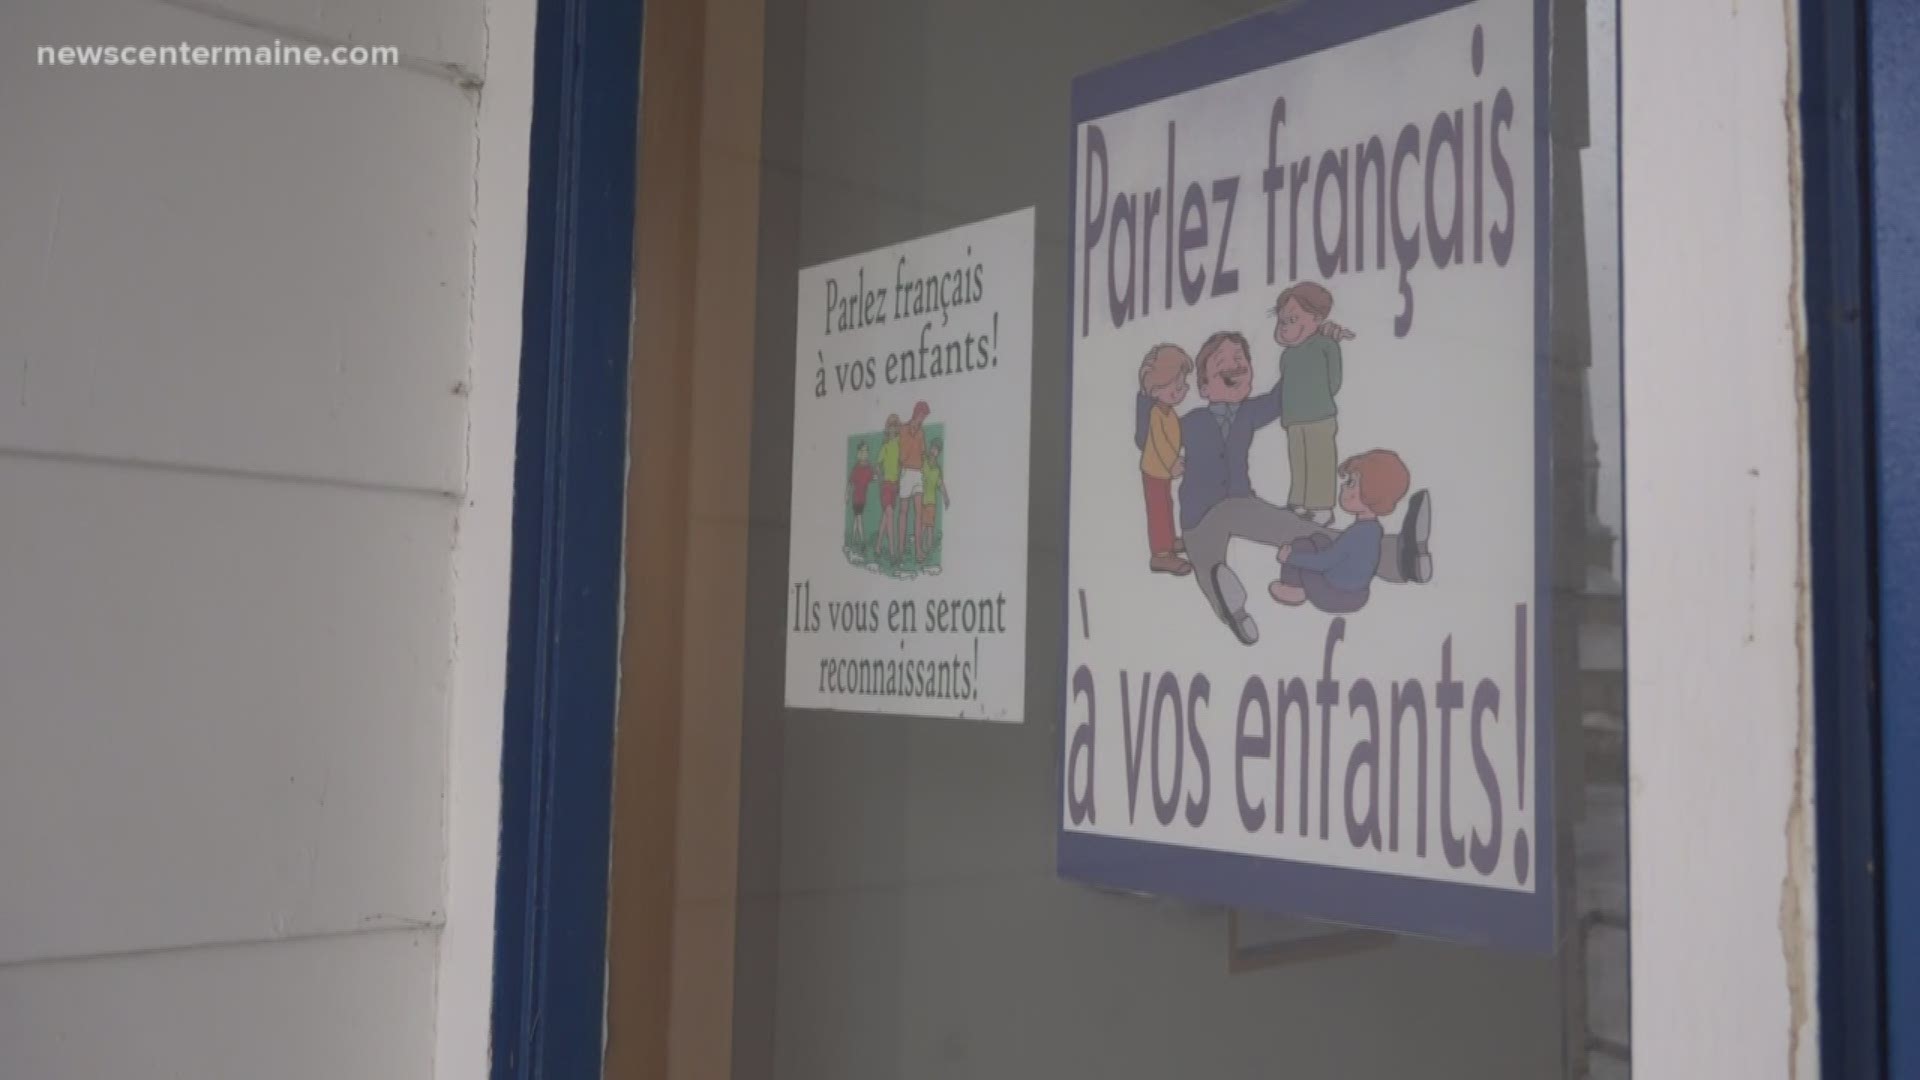 School superintendent says that she rarely hears French being spoken among her students like years past. She feels that speaking French is dying among the younger generation of French Mainers.